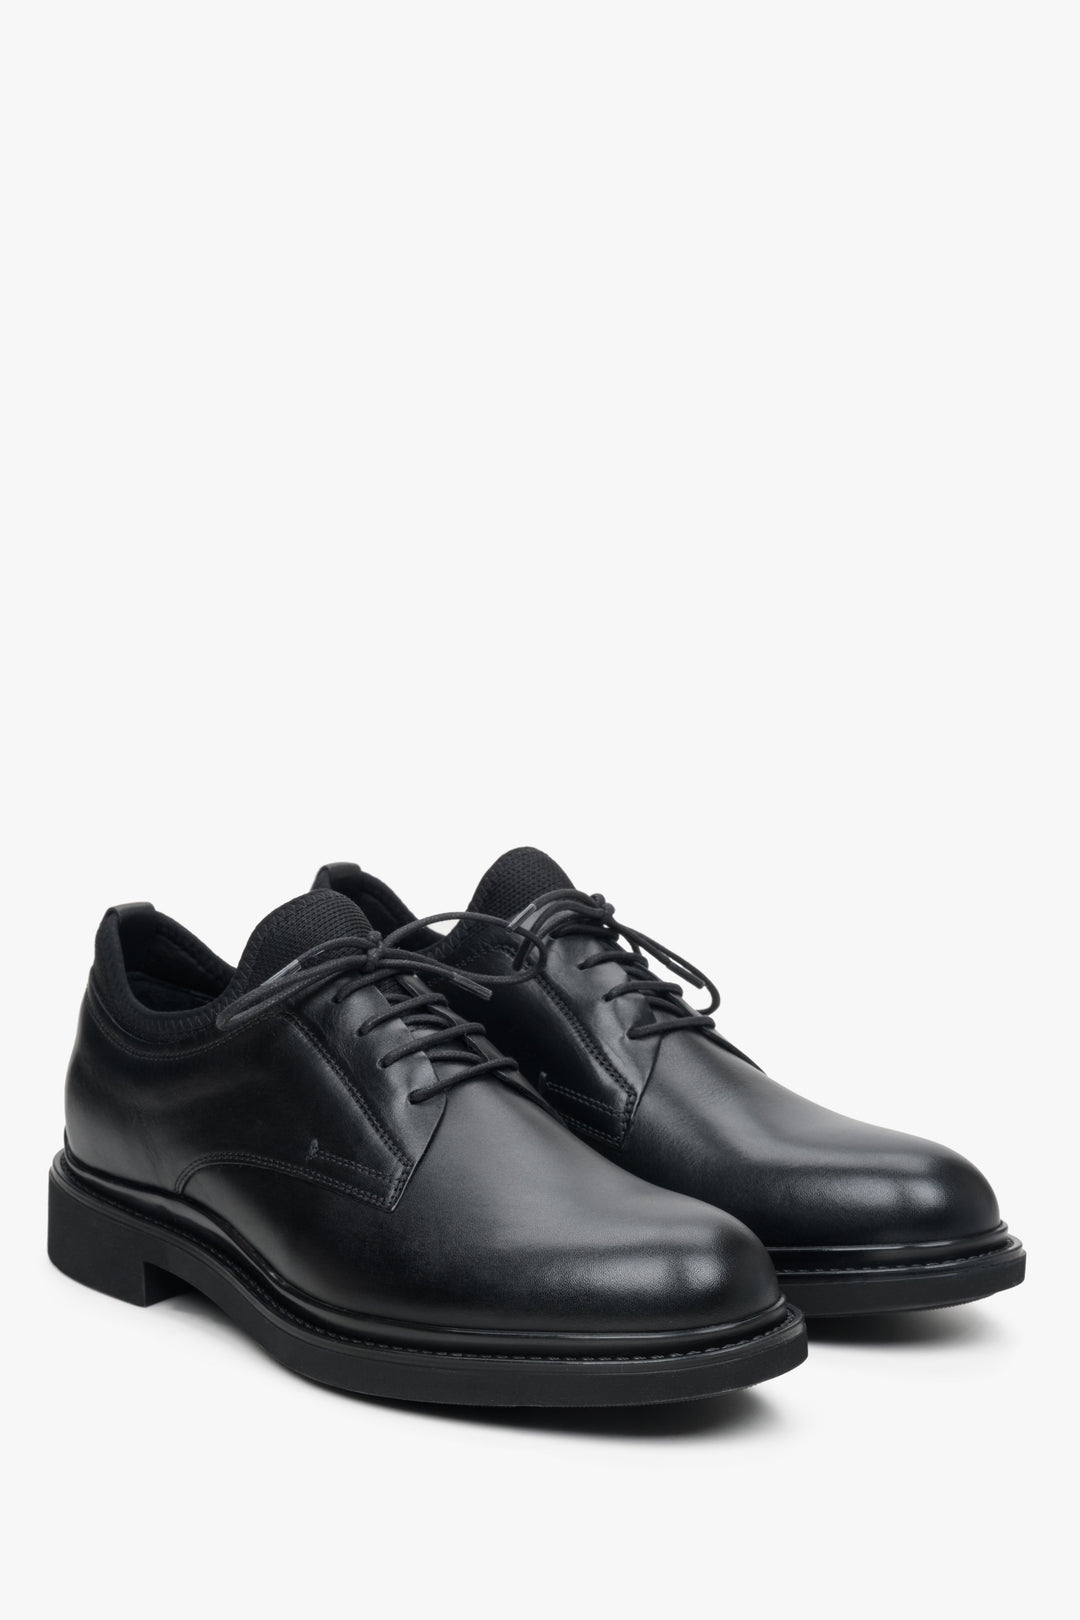 Men's black lace-up shoes made of genuine leather by Estro.